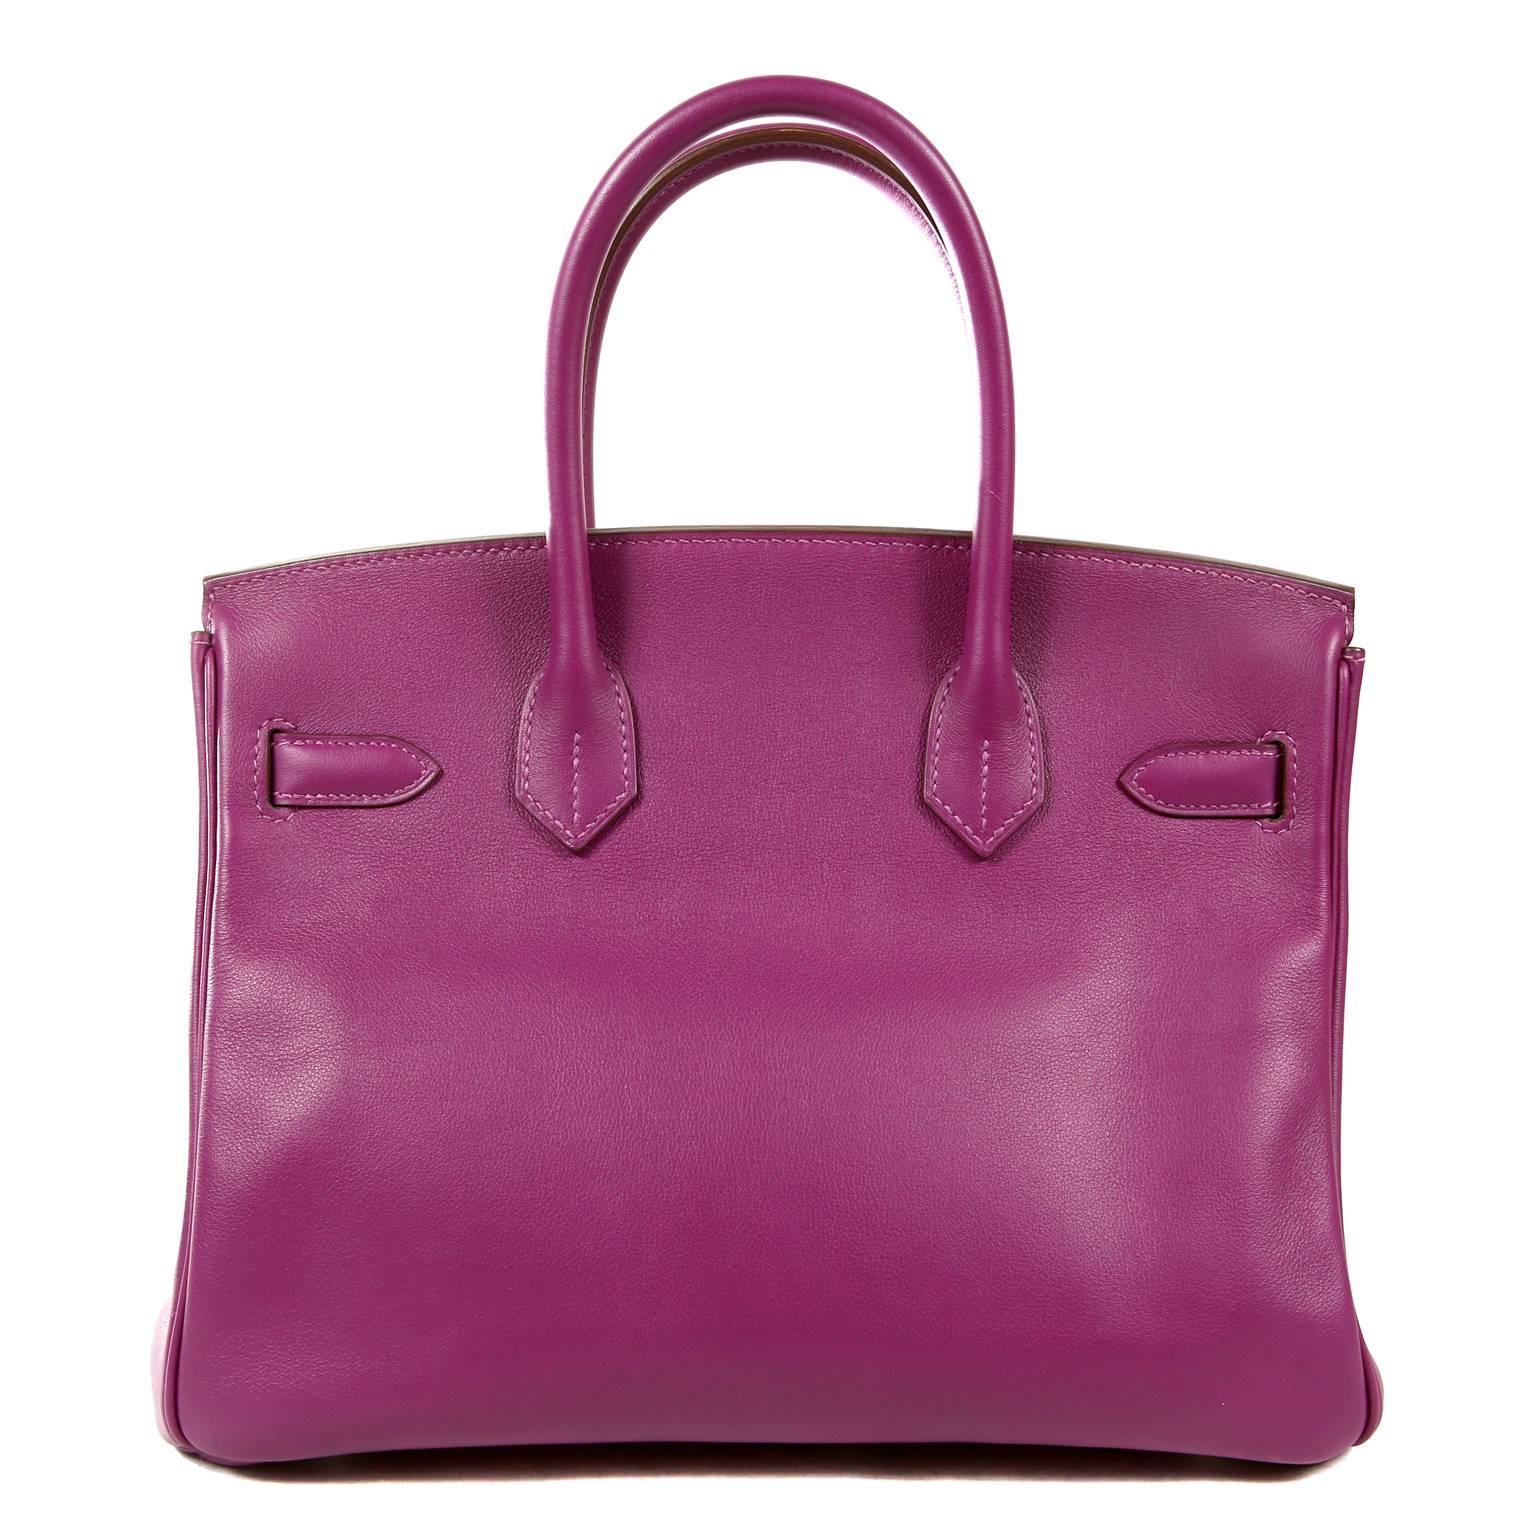 Hermès Anemone Swift Leather 30 cm Birkin-  Pristine condition, appearing never carried with protective plastic on much of the hardware.
 Hermès bags are considered the ultimate luxury item.  Hand stitched by skilled craftsmen, wait lists of a year